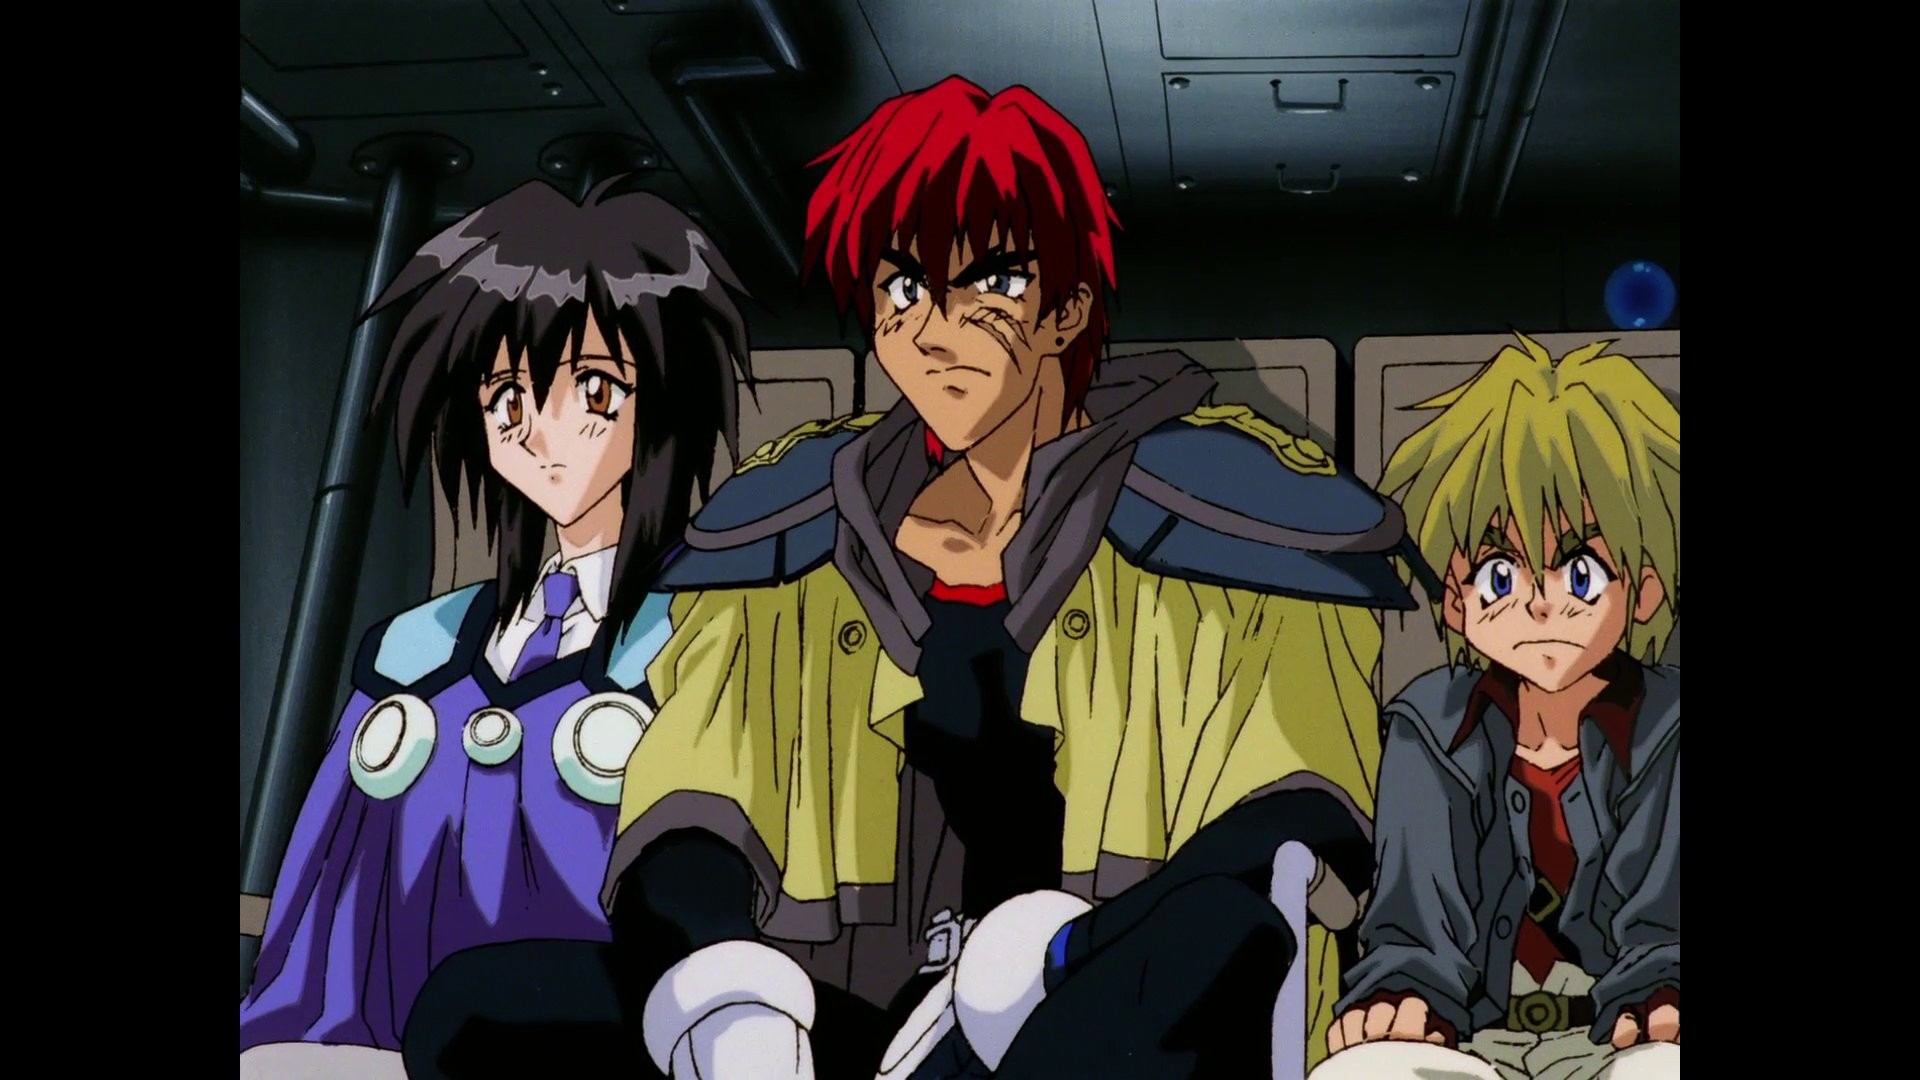 1920x1080 Picture. Outlaw Star ...